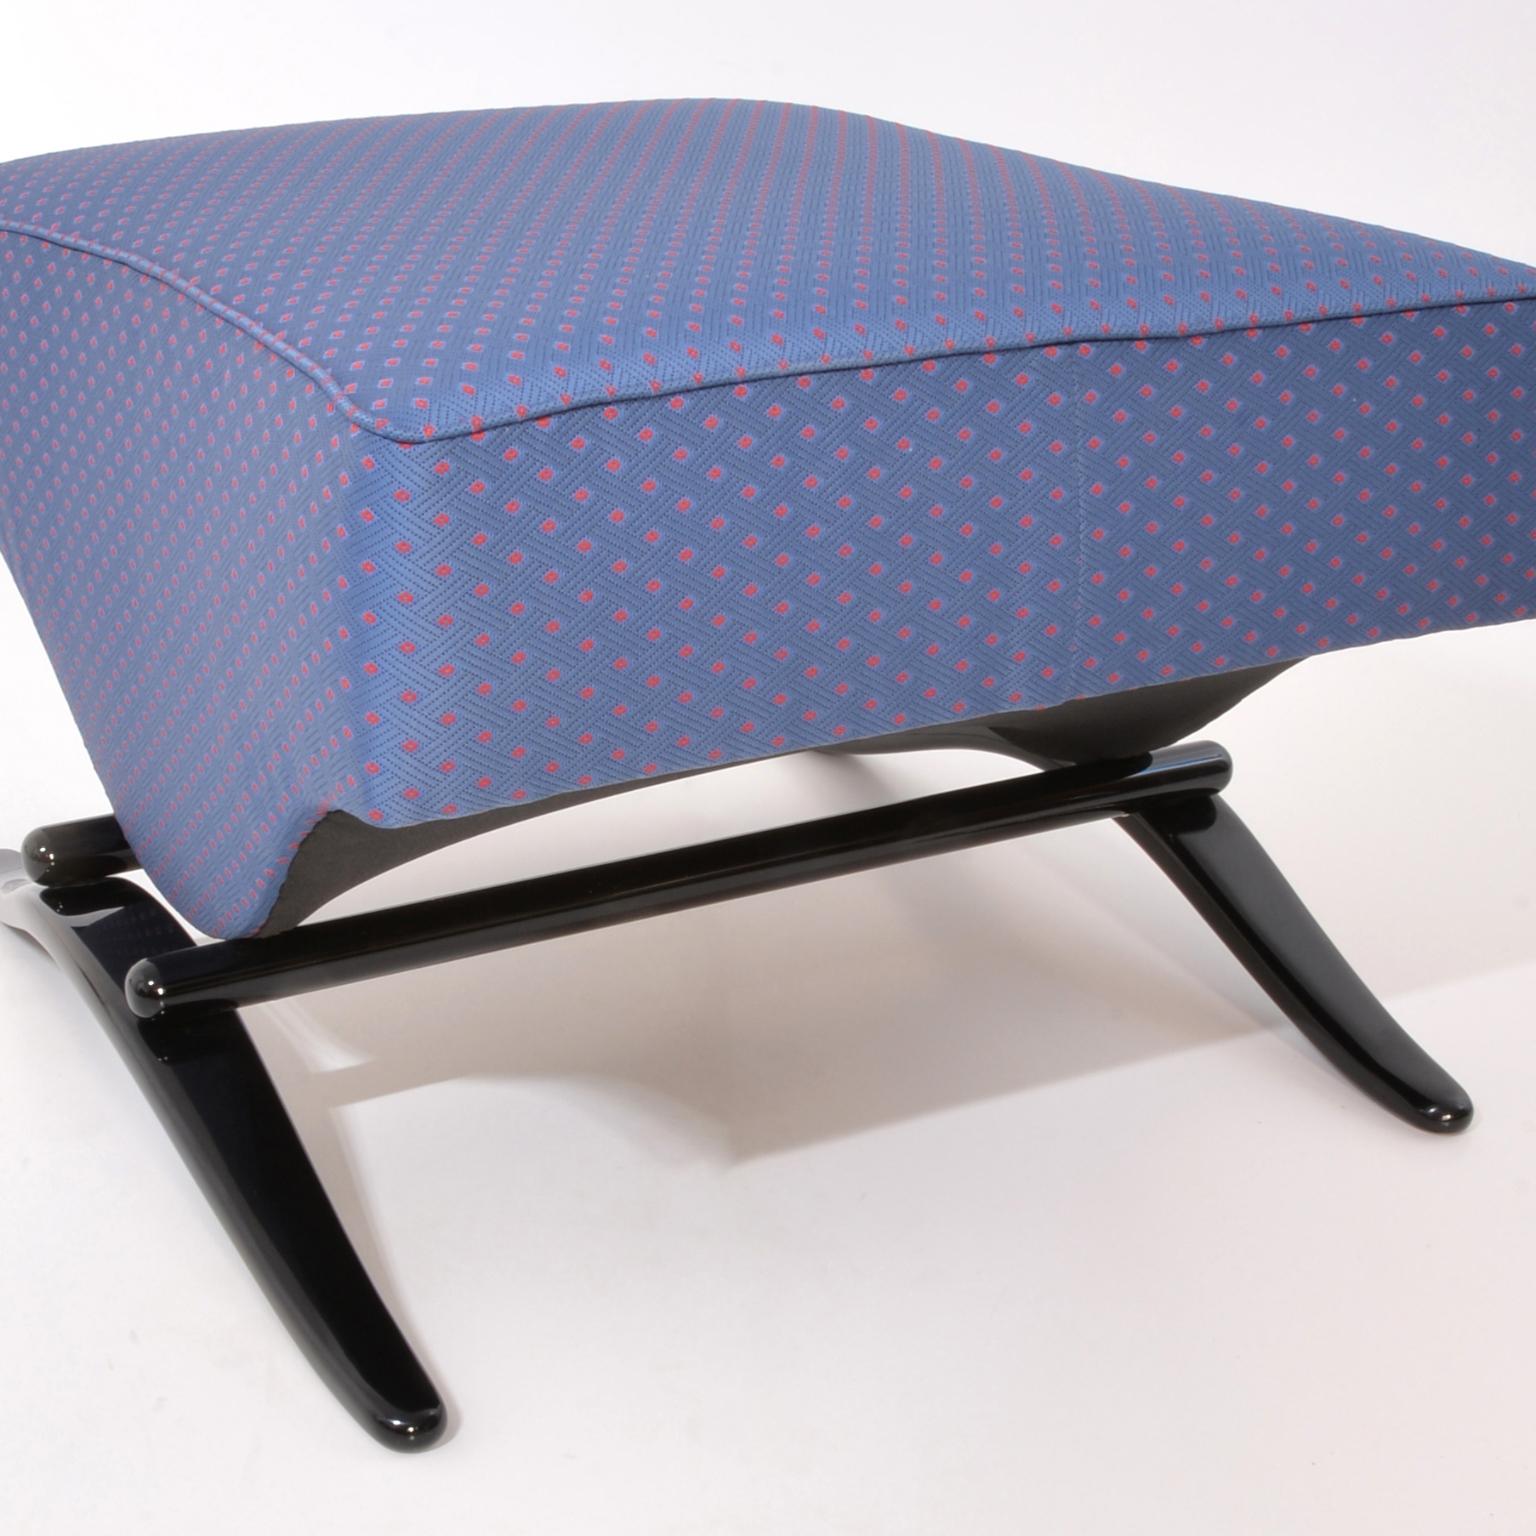 Bespoke Modernist Stool, High Gloss Lacquered Wood, Fabric Upholstery For Sale 1